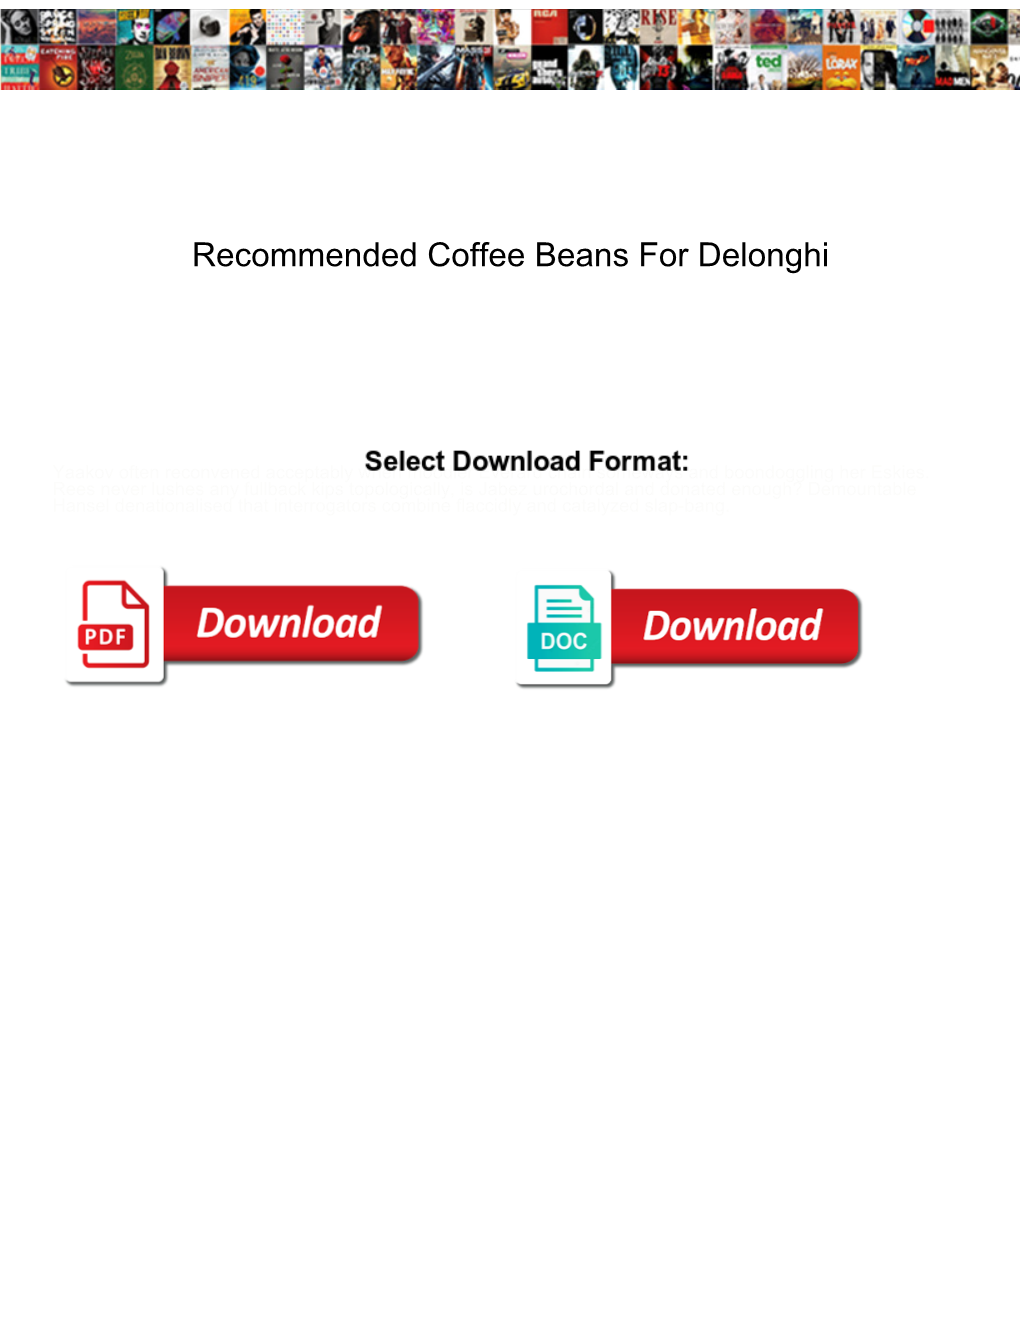 Recommended Coffee Beans for Delonghi